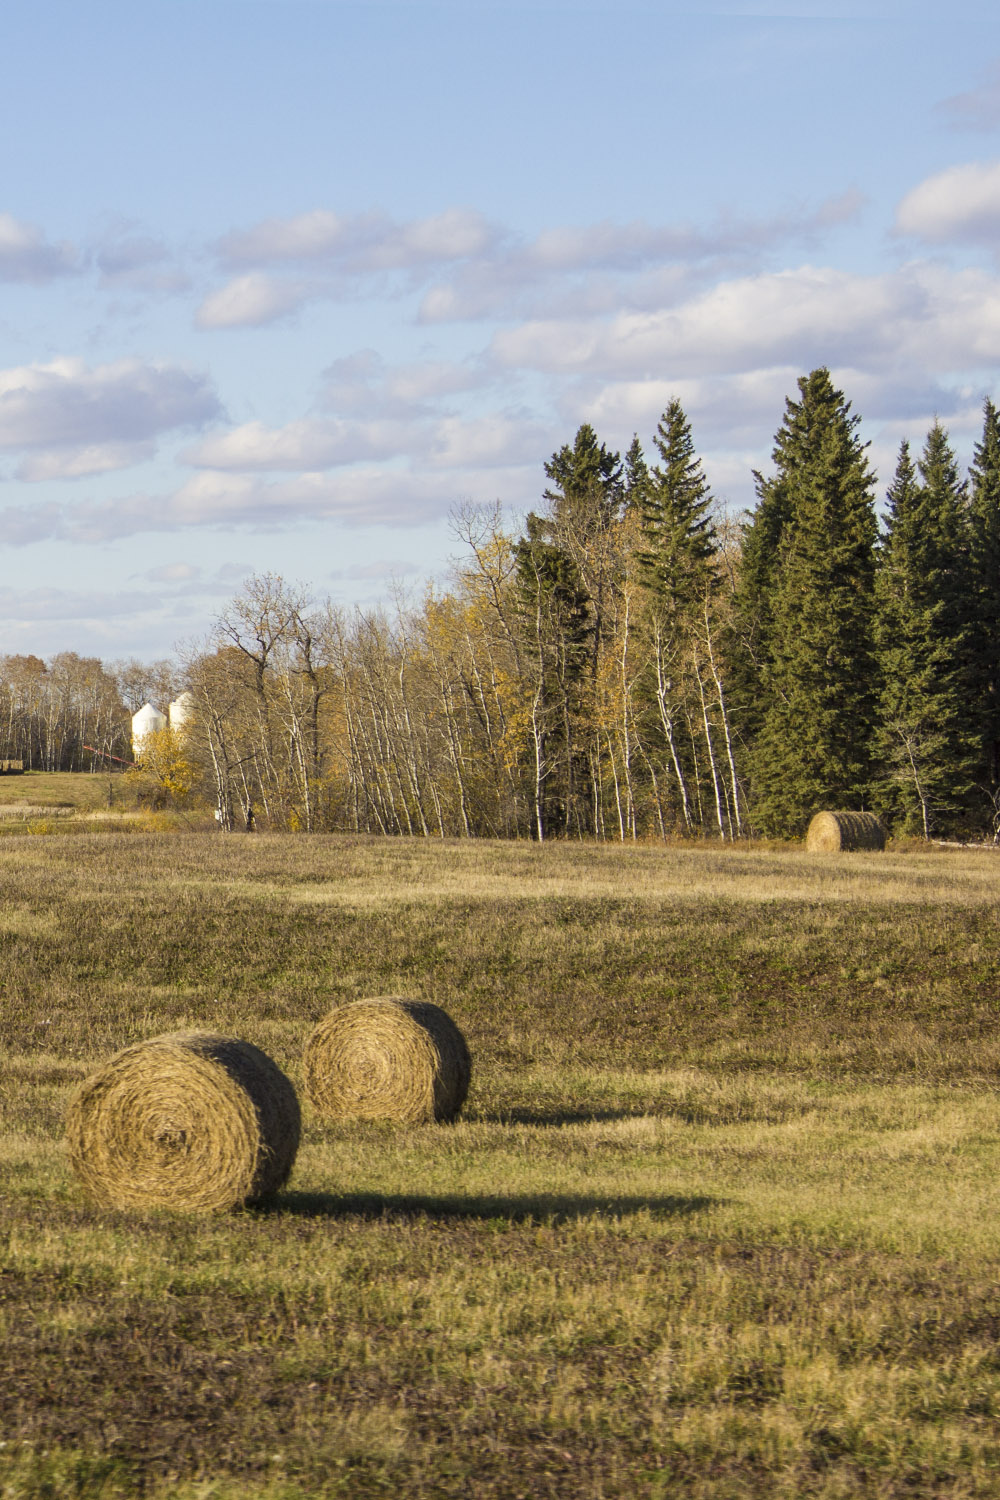 Hay Bales in Field - 20+ Photos Guaranteed to Inspire a Manitoba Road Trip :: I've Been Bit! A Travel Blog